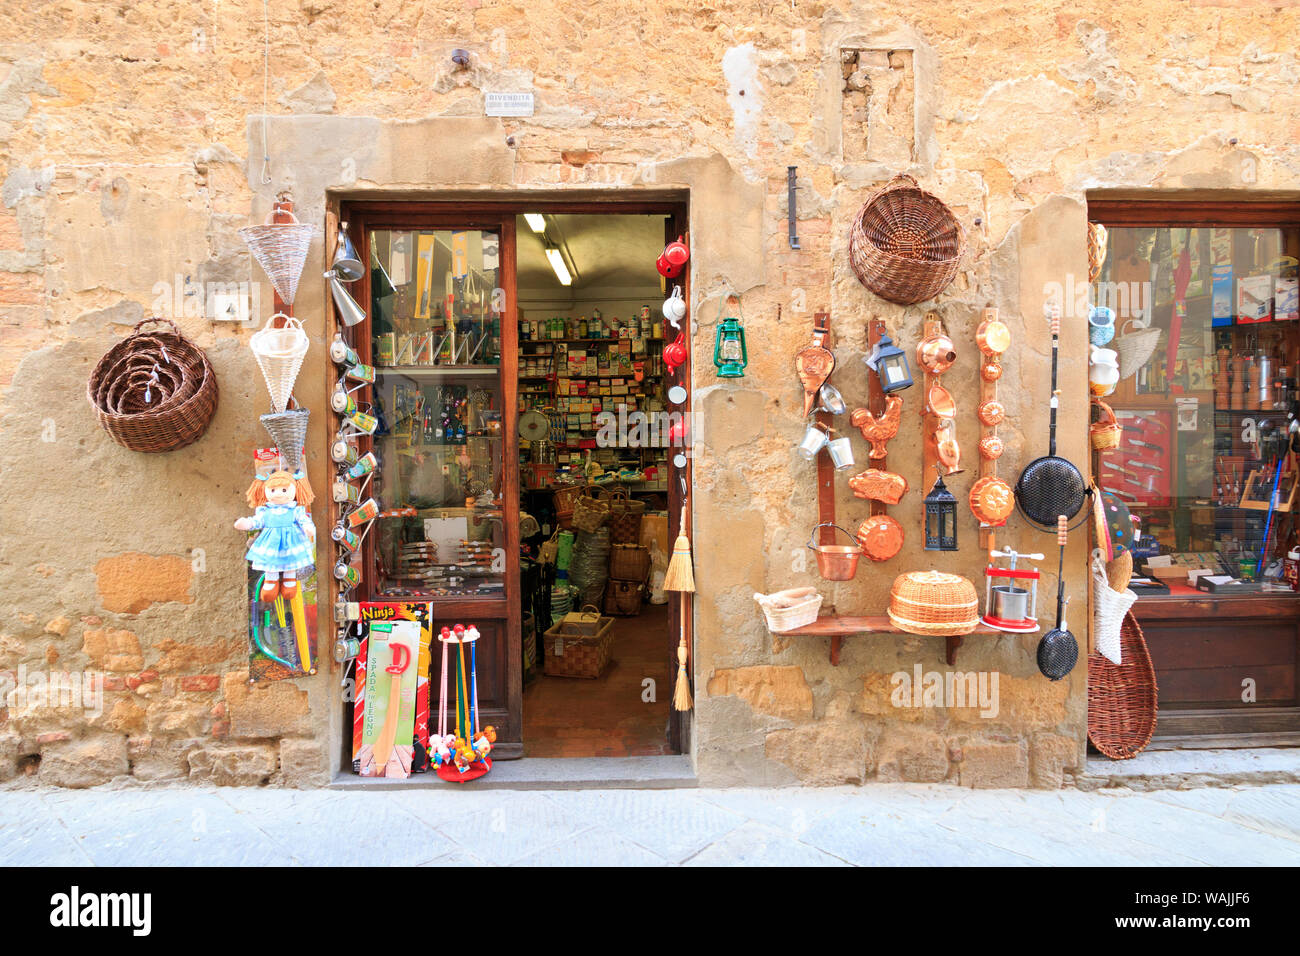 Italy, Tuscany, province of Siena, Chiusure. Hill town. Kitchenware store. Stock Photo